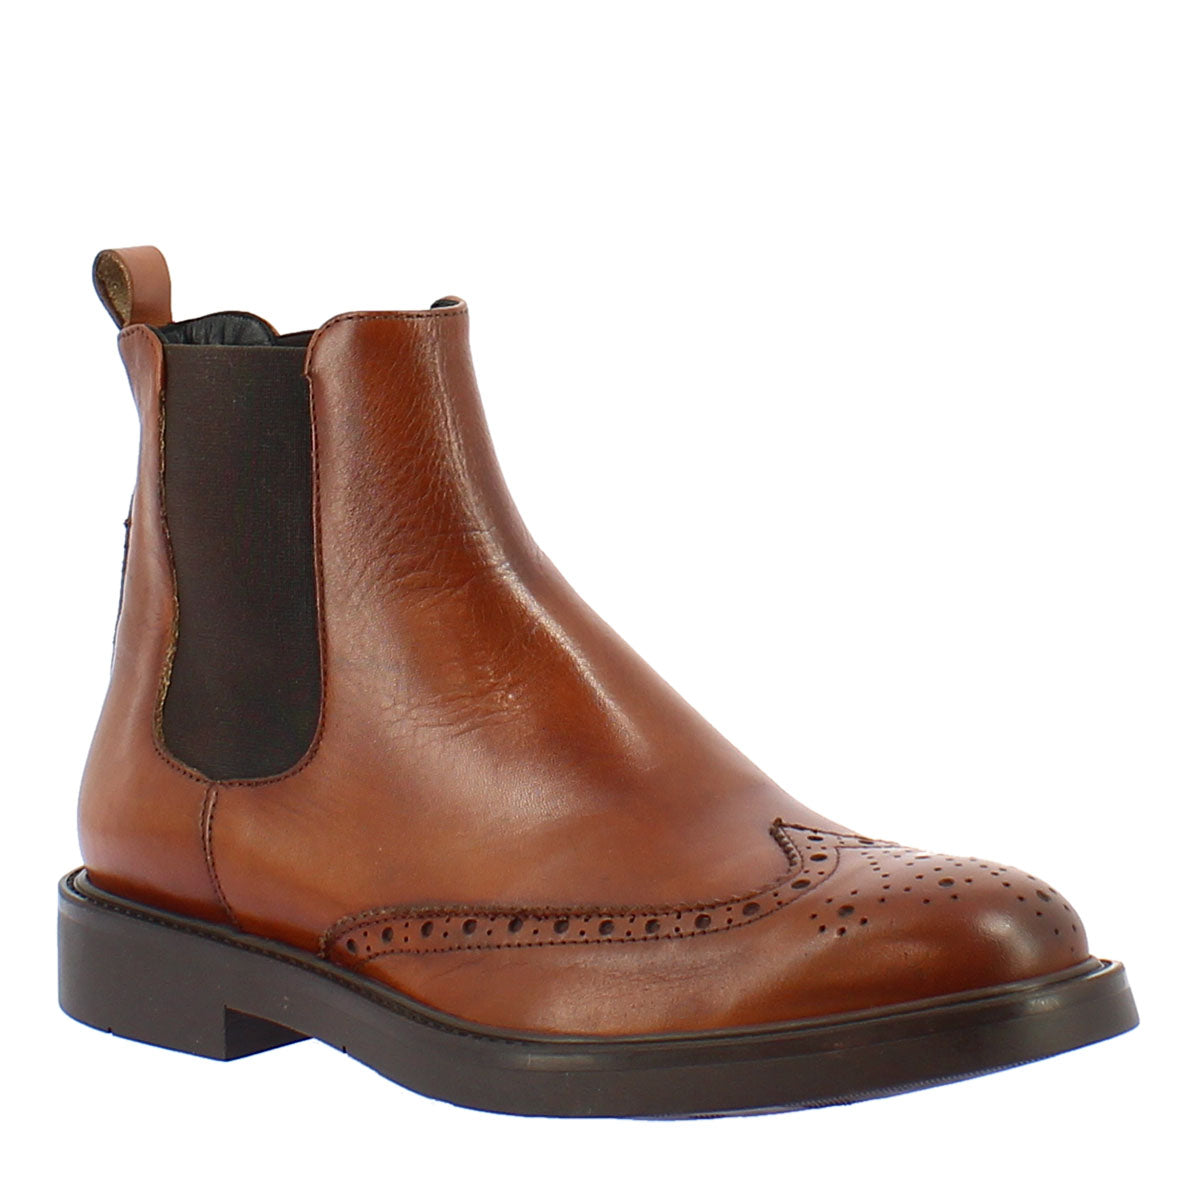 Chelsea boot in tan leather with rubber sole